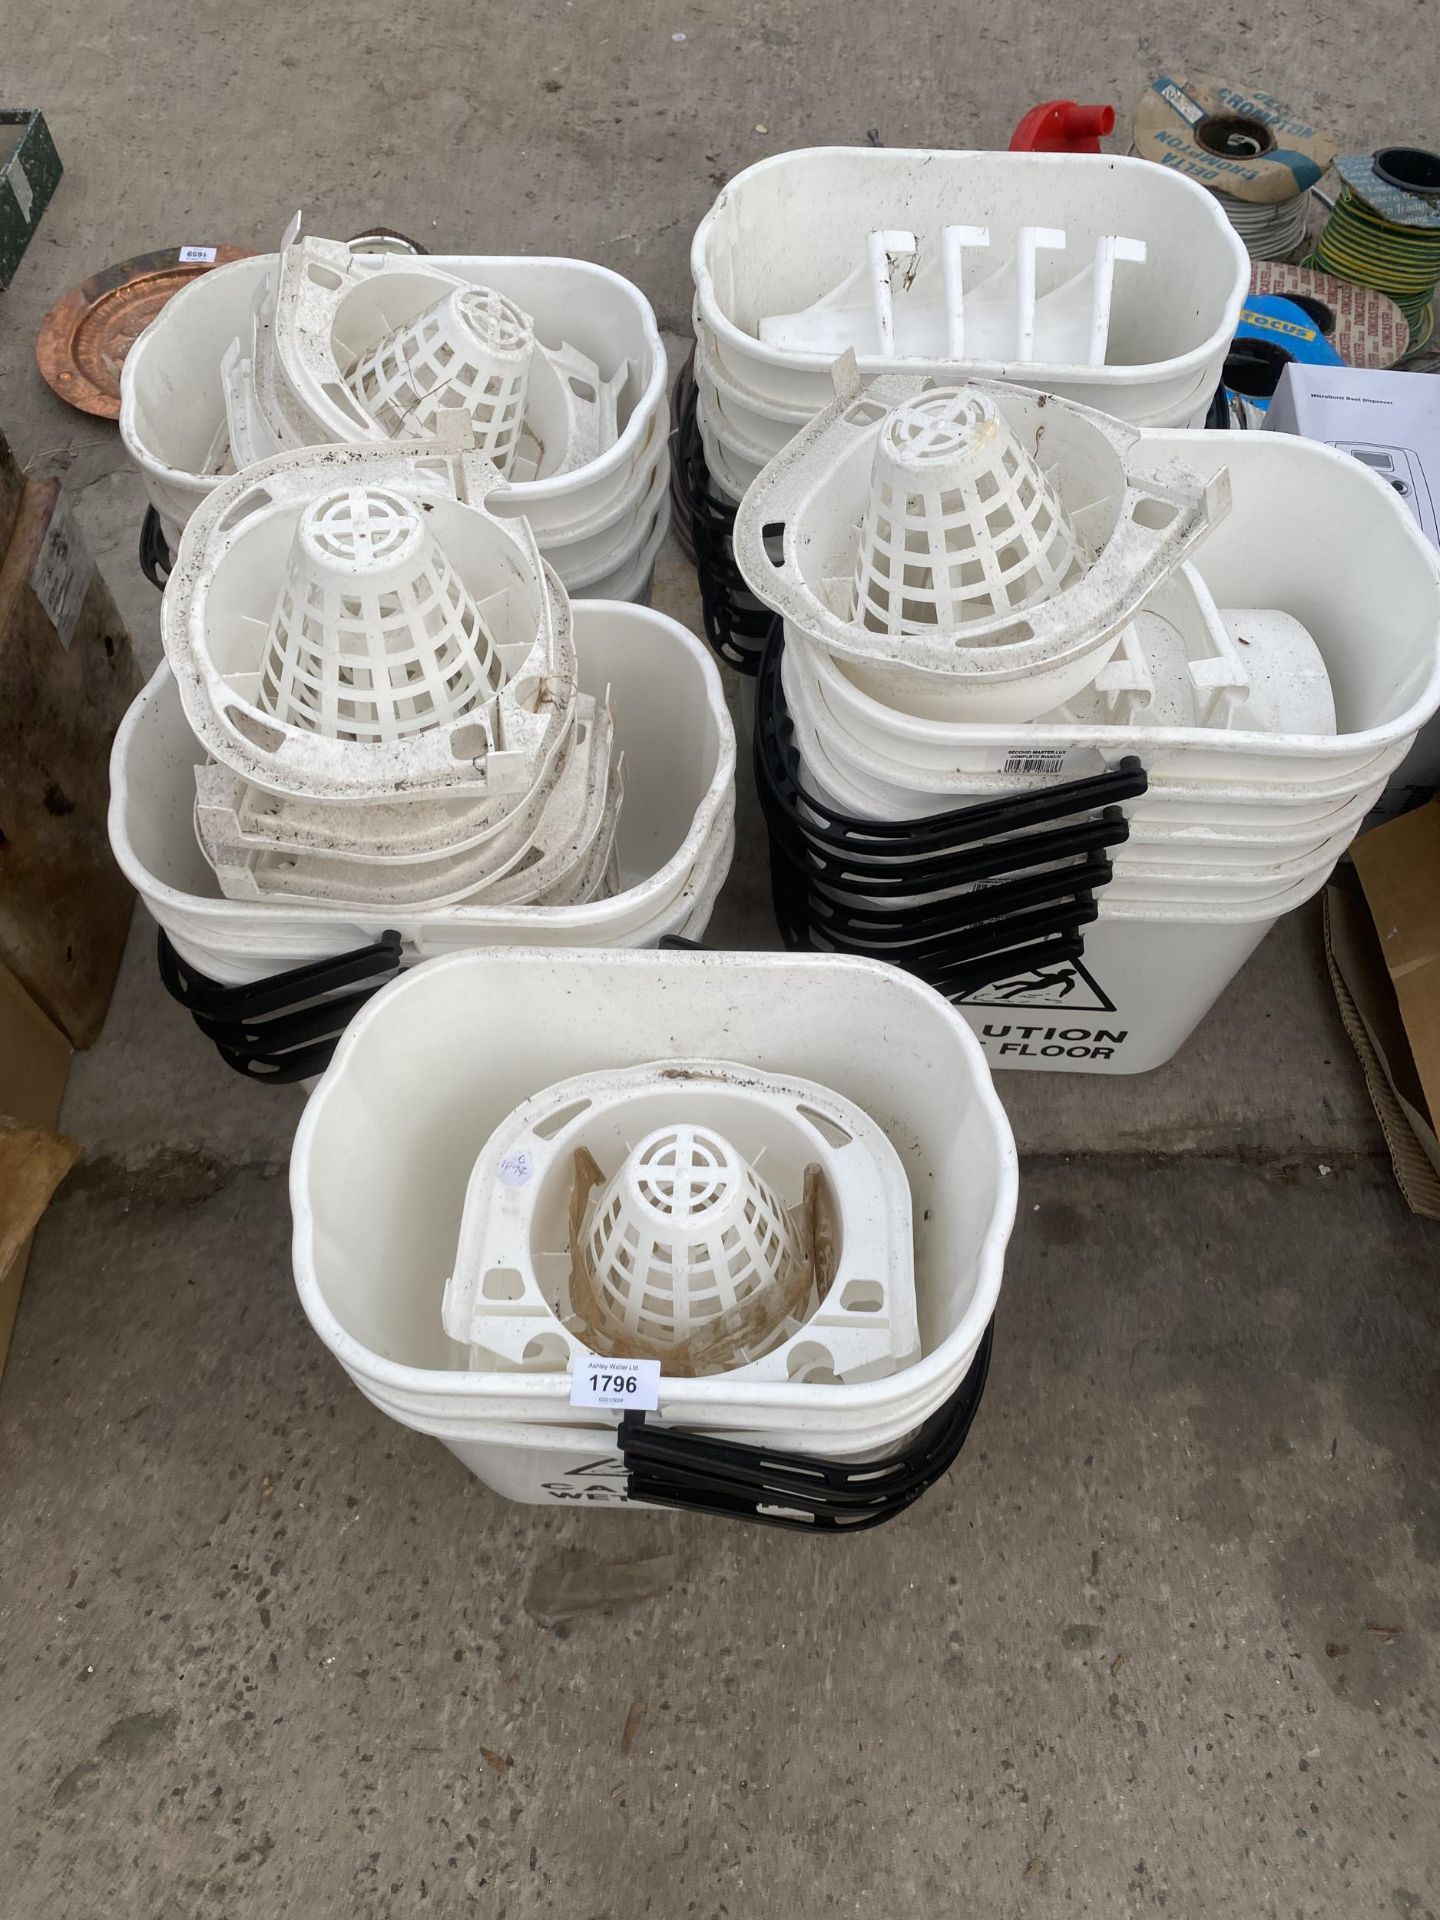 A LARGE QUANTITY OF NEW PLASTIC MOP BUCKETS WITH WARNING